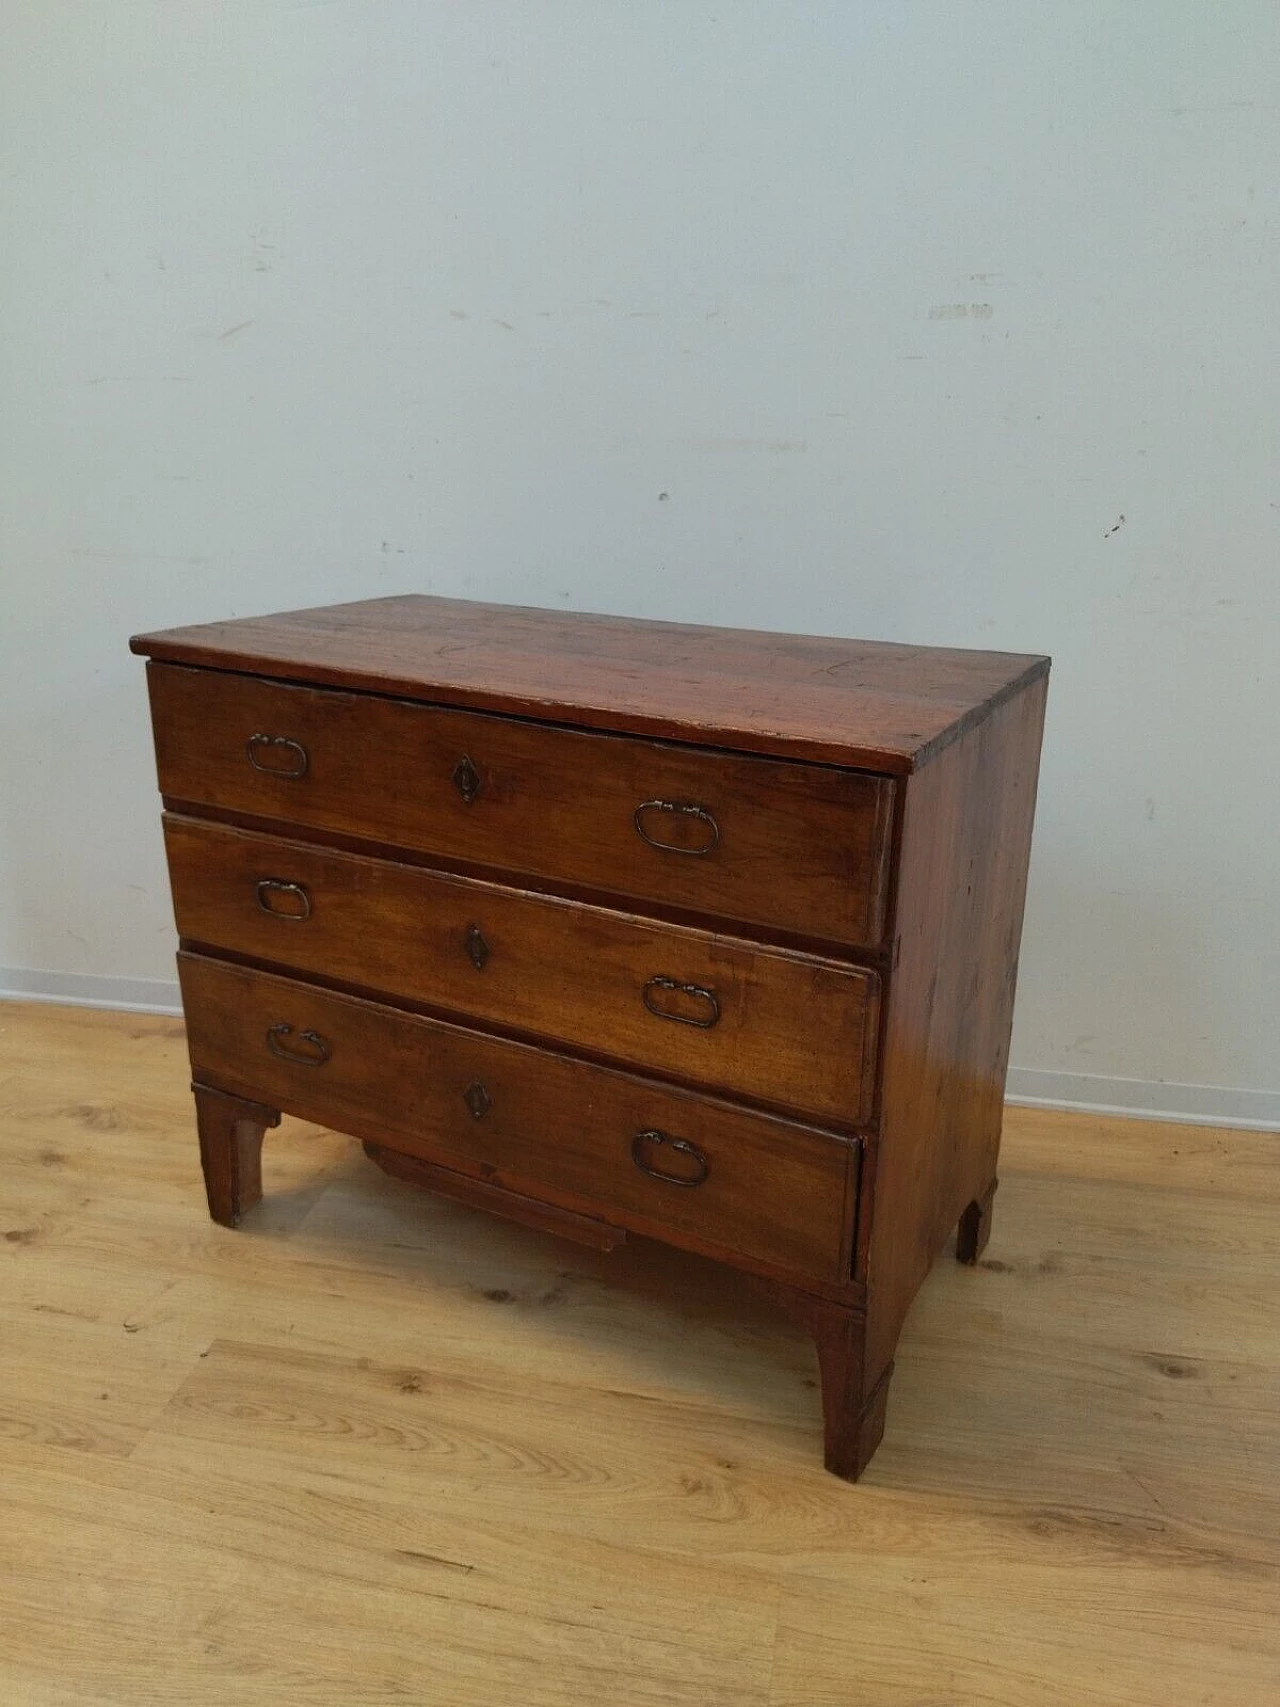 Walnut and fir chest of drawers, mid-19th century 14